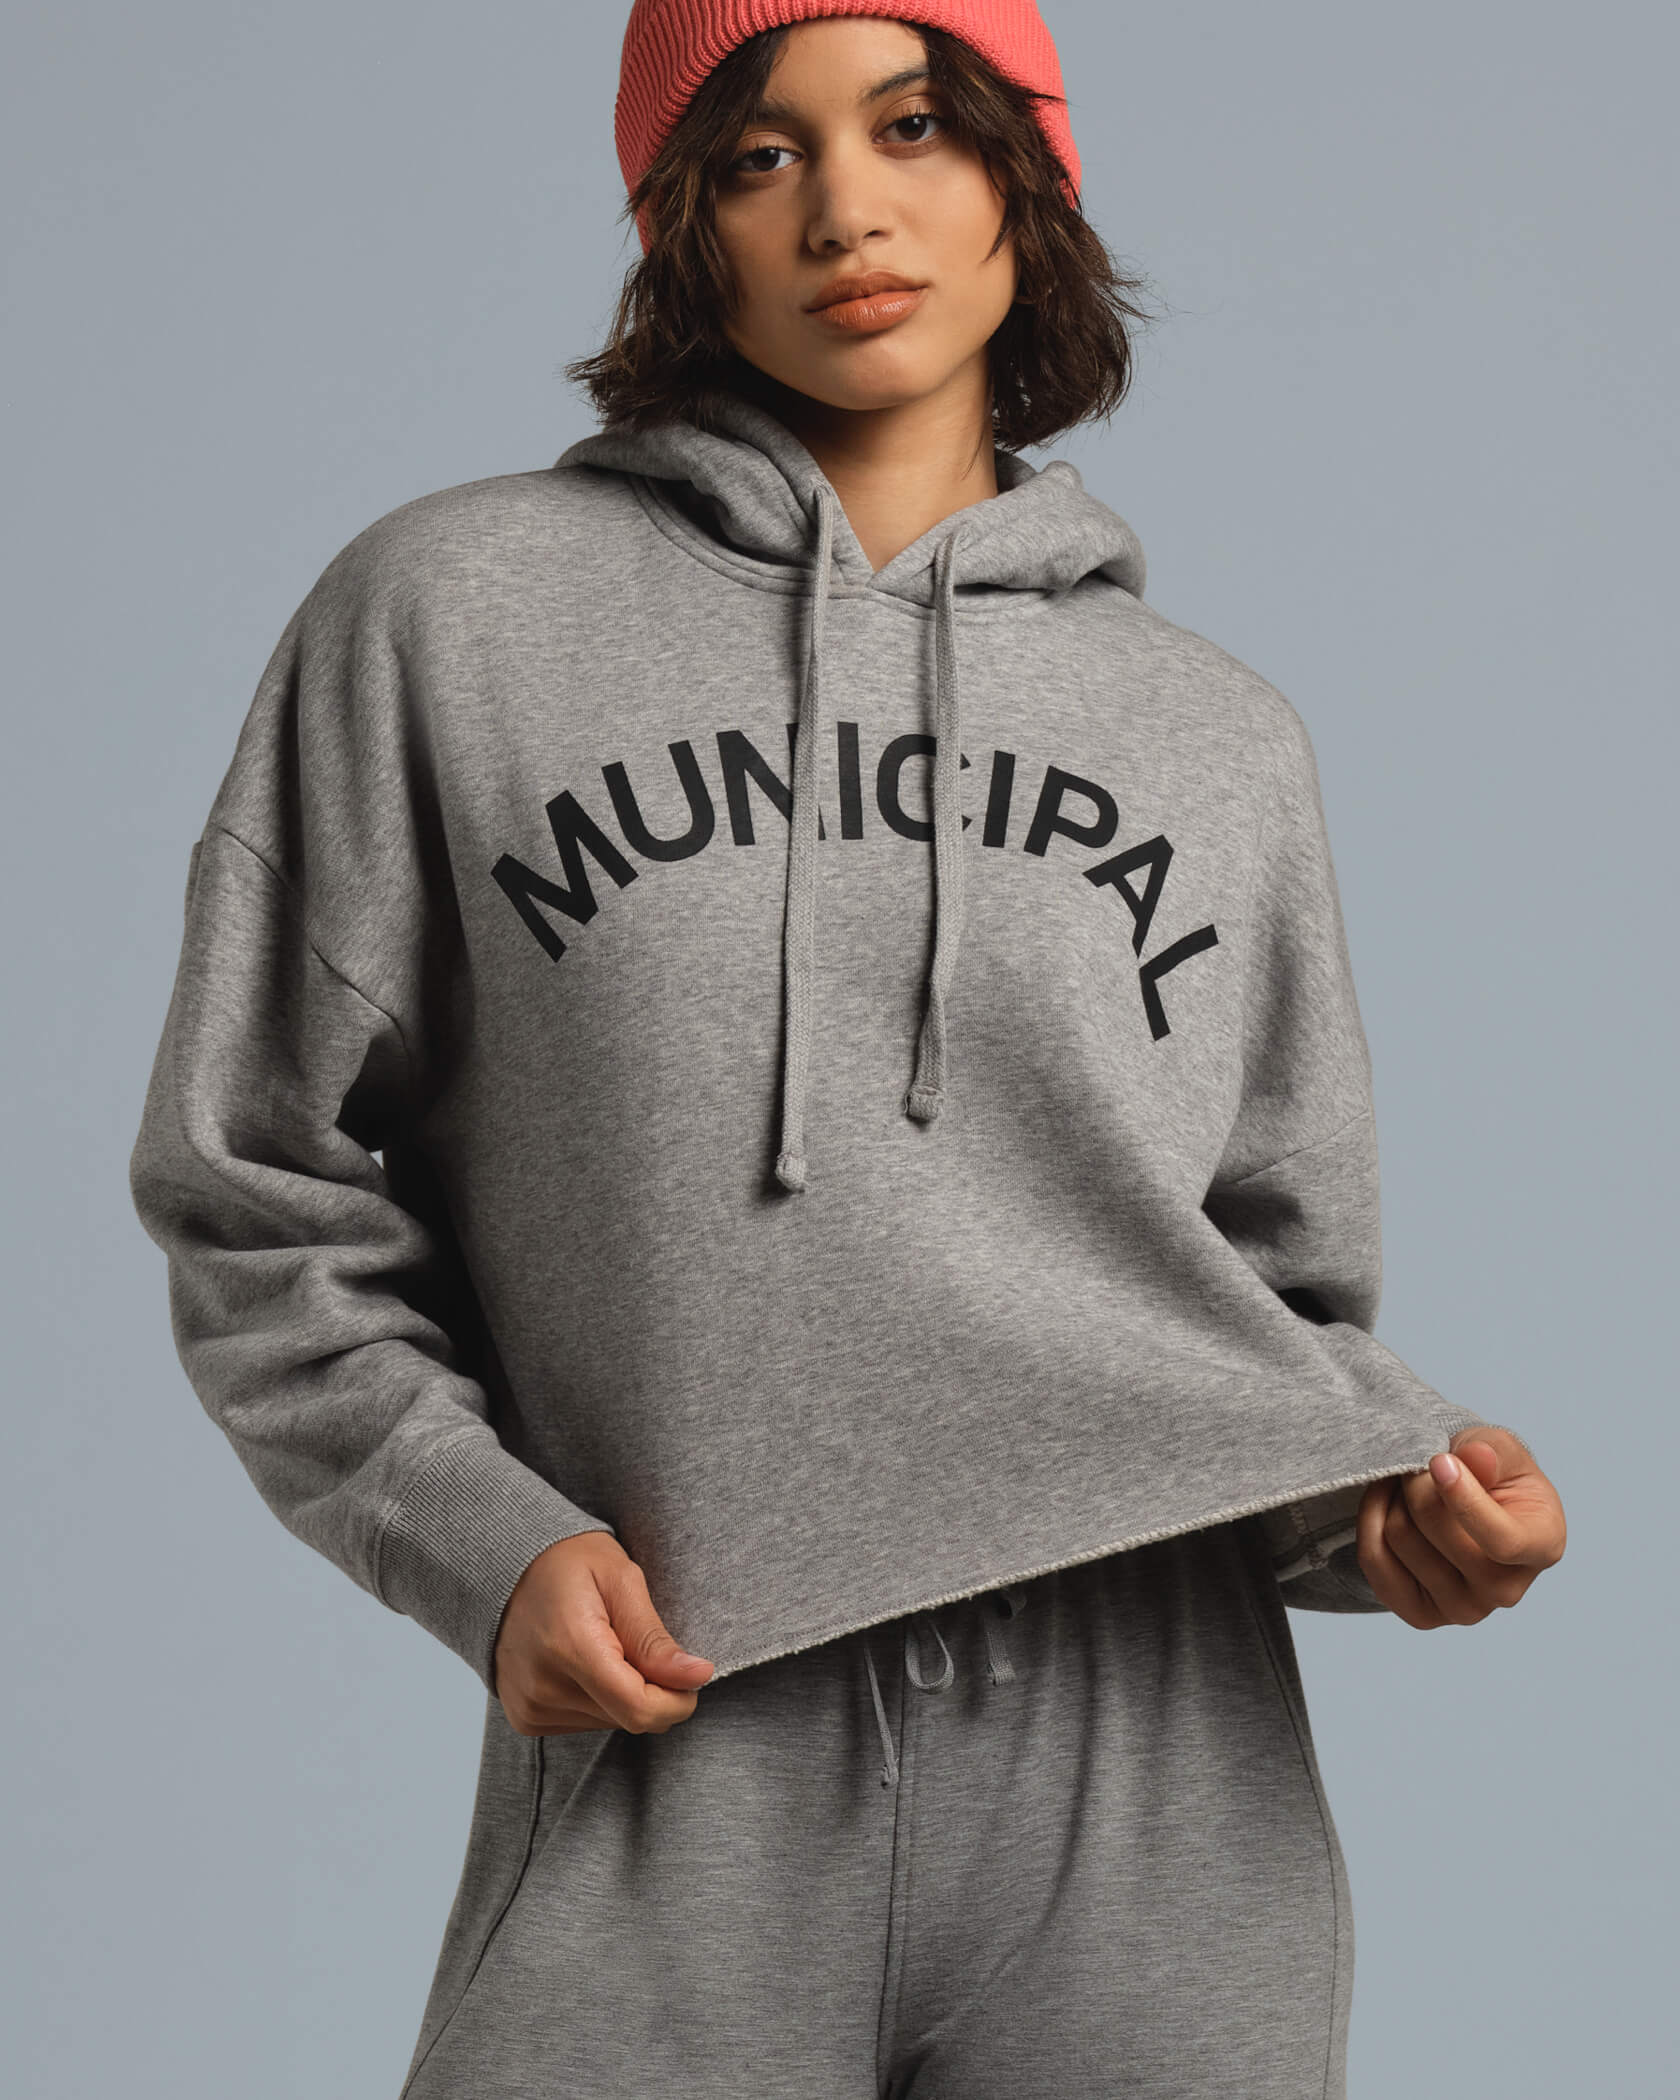 7Degrees Launches Unique Hoodie Designs Exclusively for Women